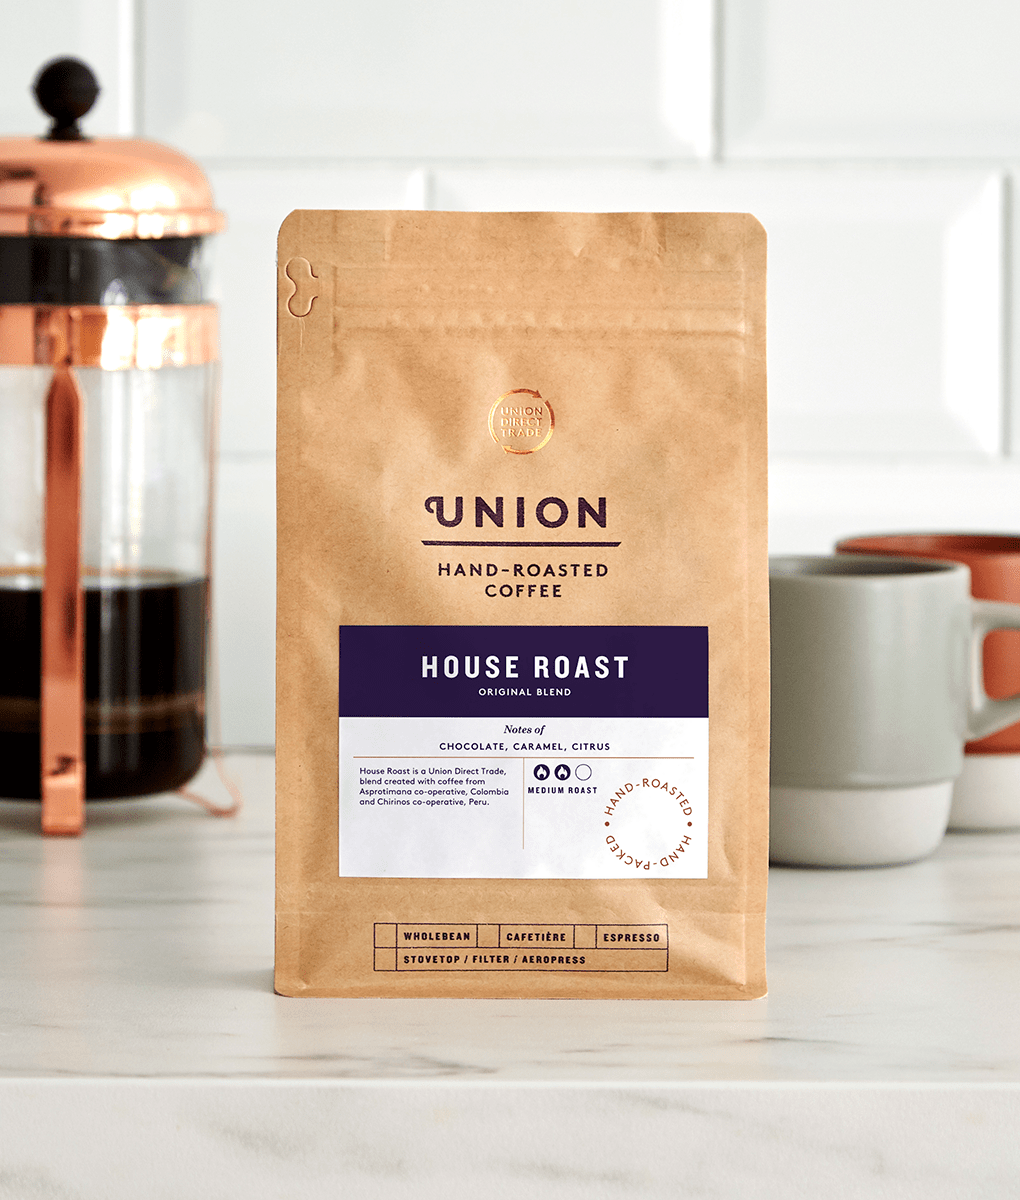 House Roast, Cafetiere Blend, Union Coffee Bag,Wholebean,Cafetiere,Filter,Espresso,200g,1kg